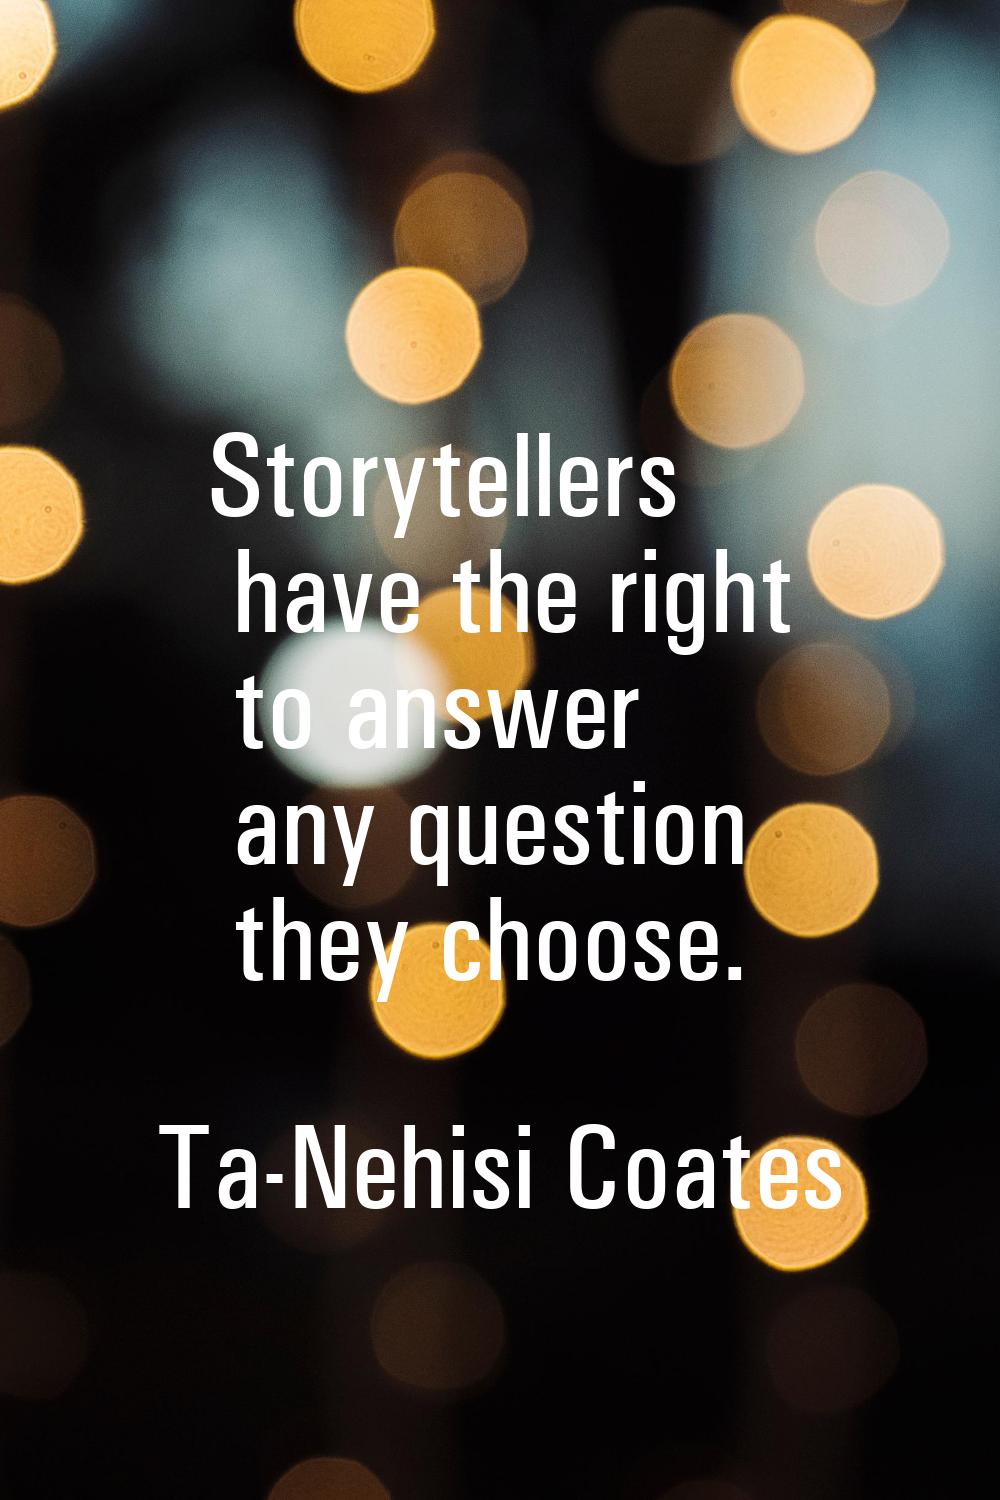 Storytellers have the right to answer any question they choose.